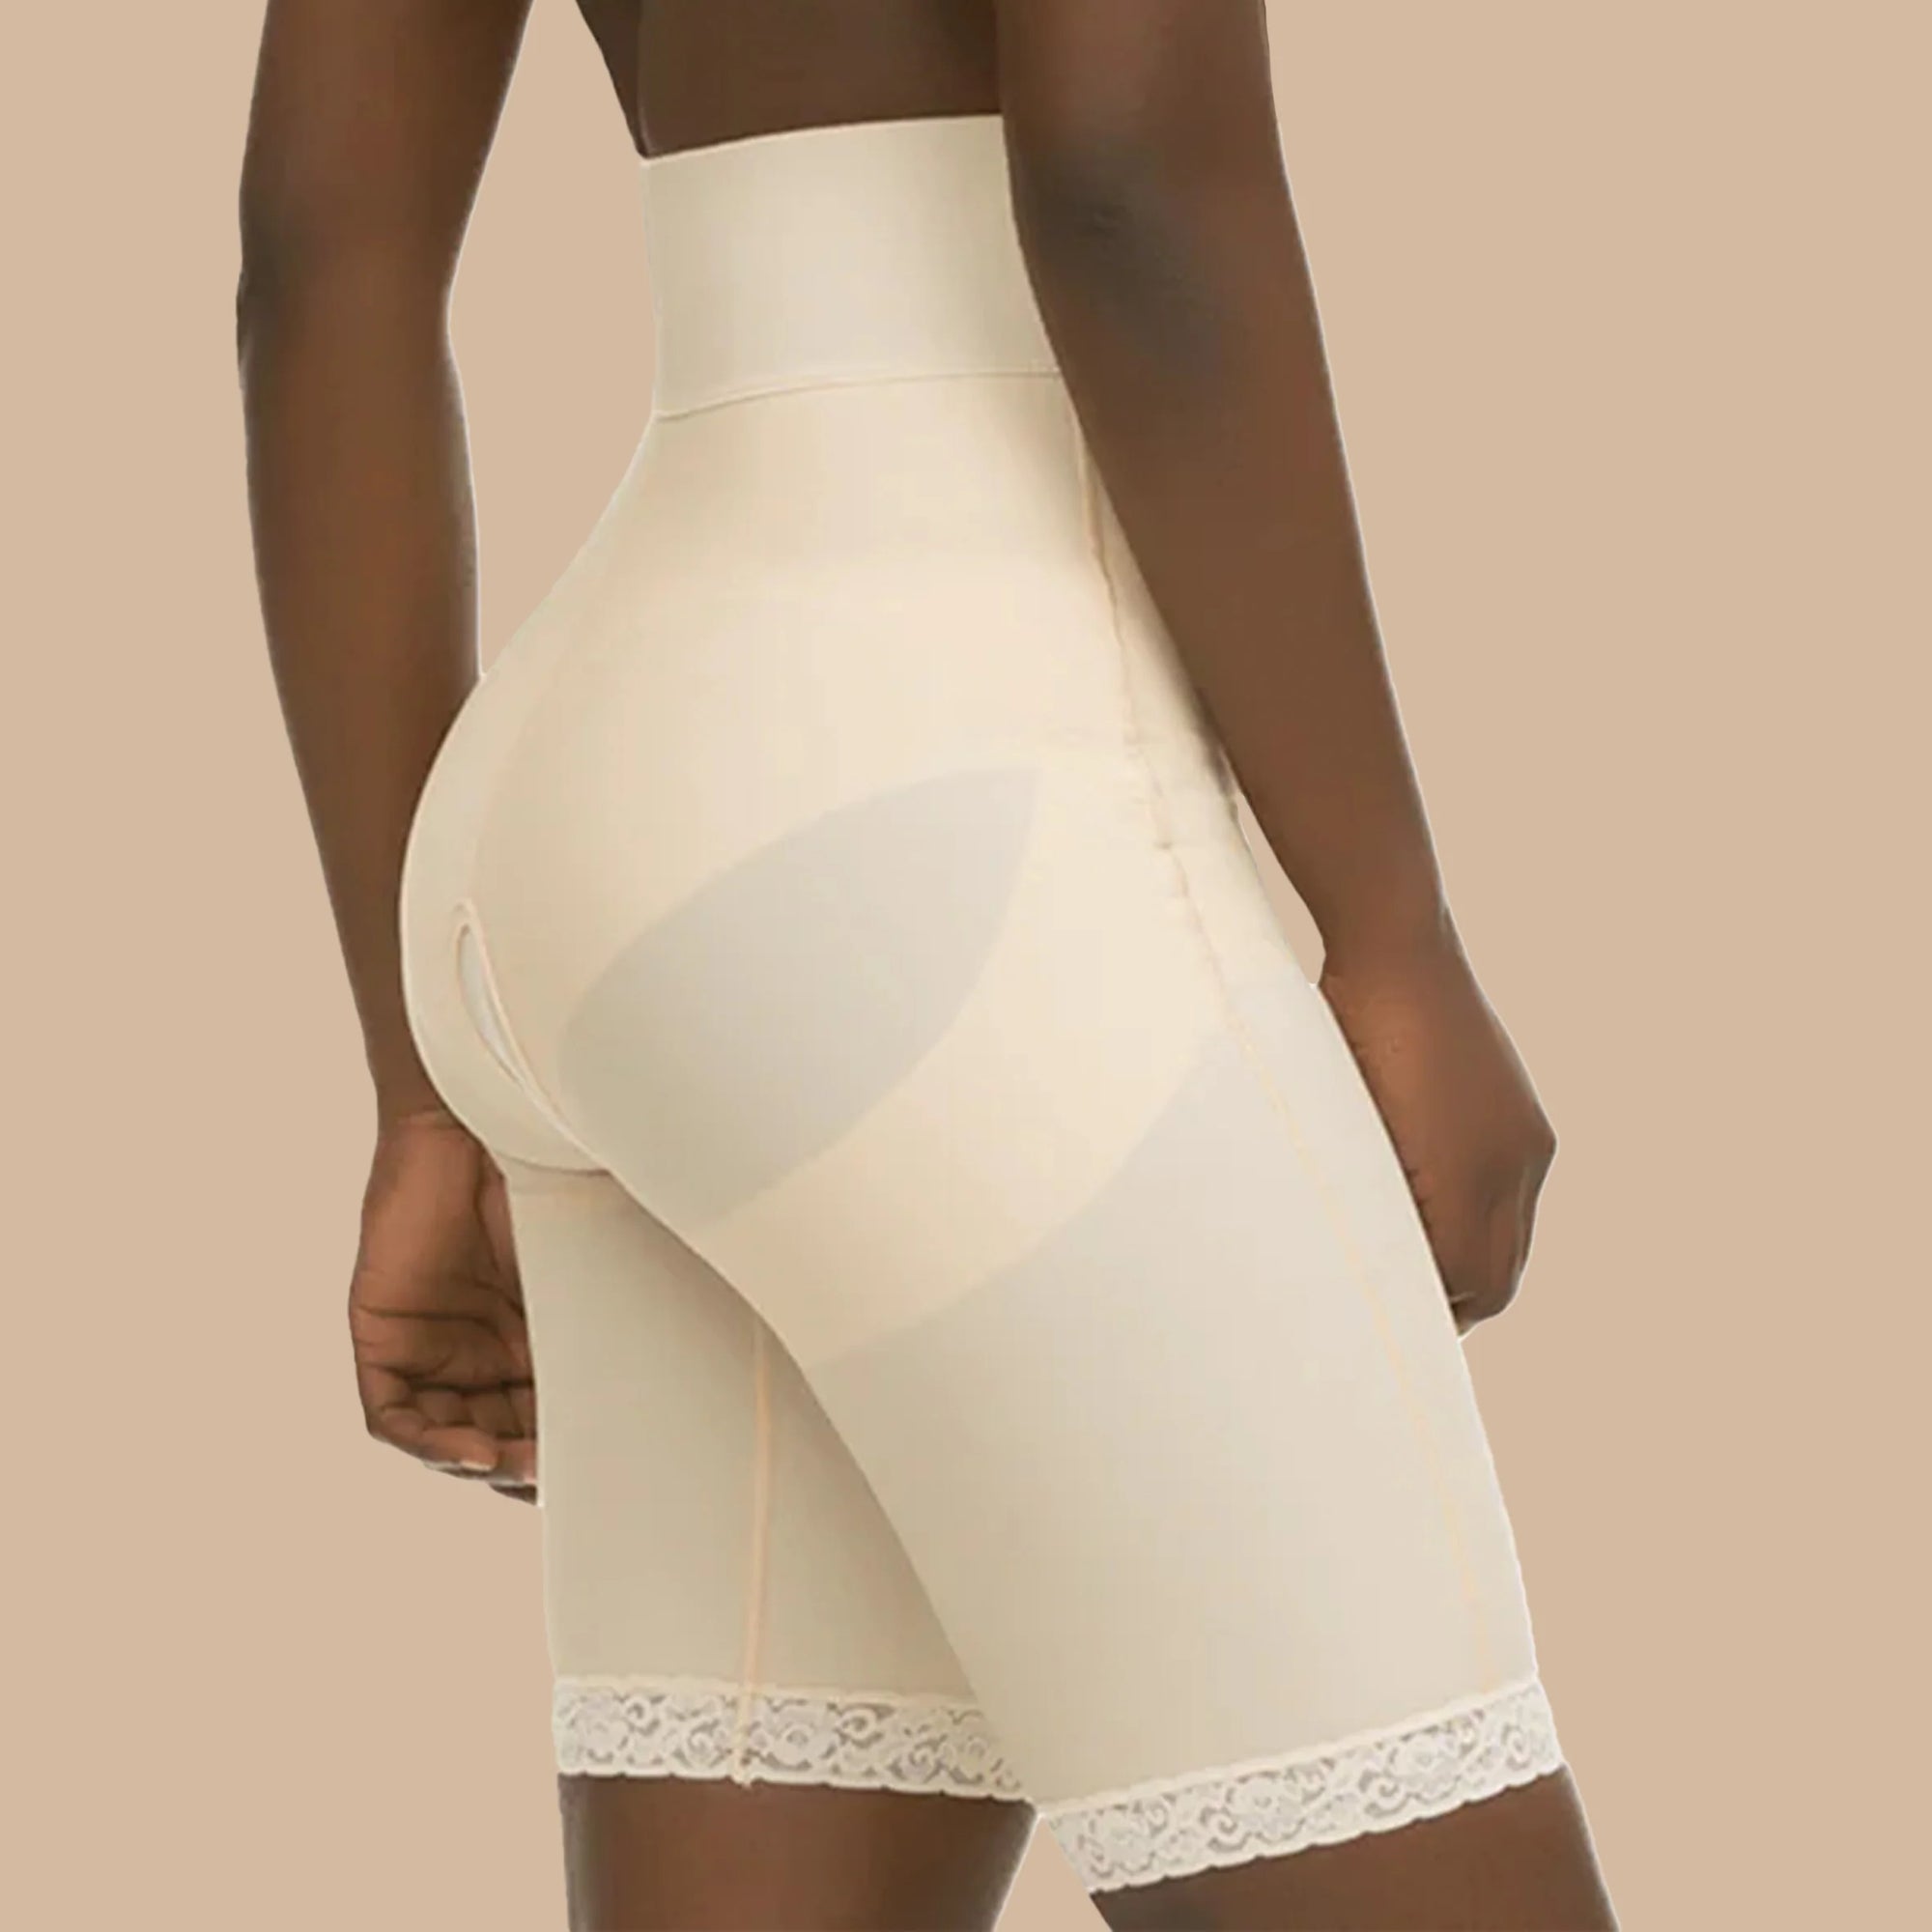 Woman wearing a post-surgical compression girdle with mid-thigh length, high waist, and glute-lifting features for support and shaping during recovery.